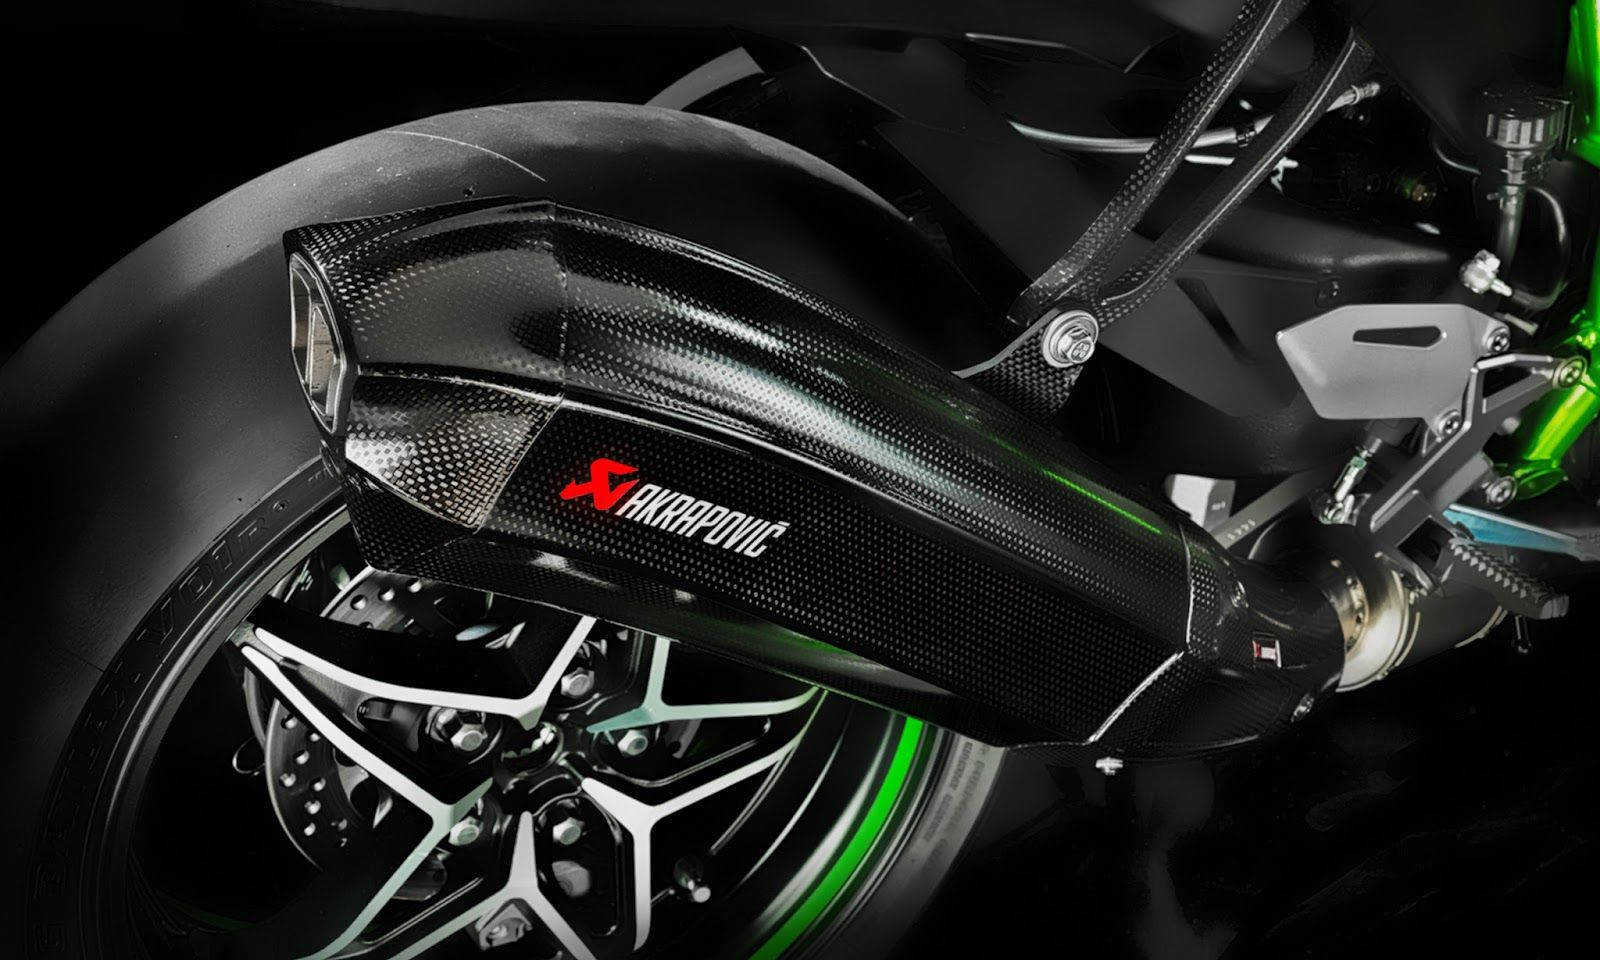 Kawasaki H2r Close-up Of Lower Features